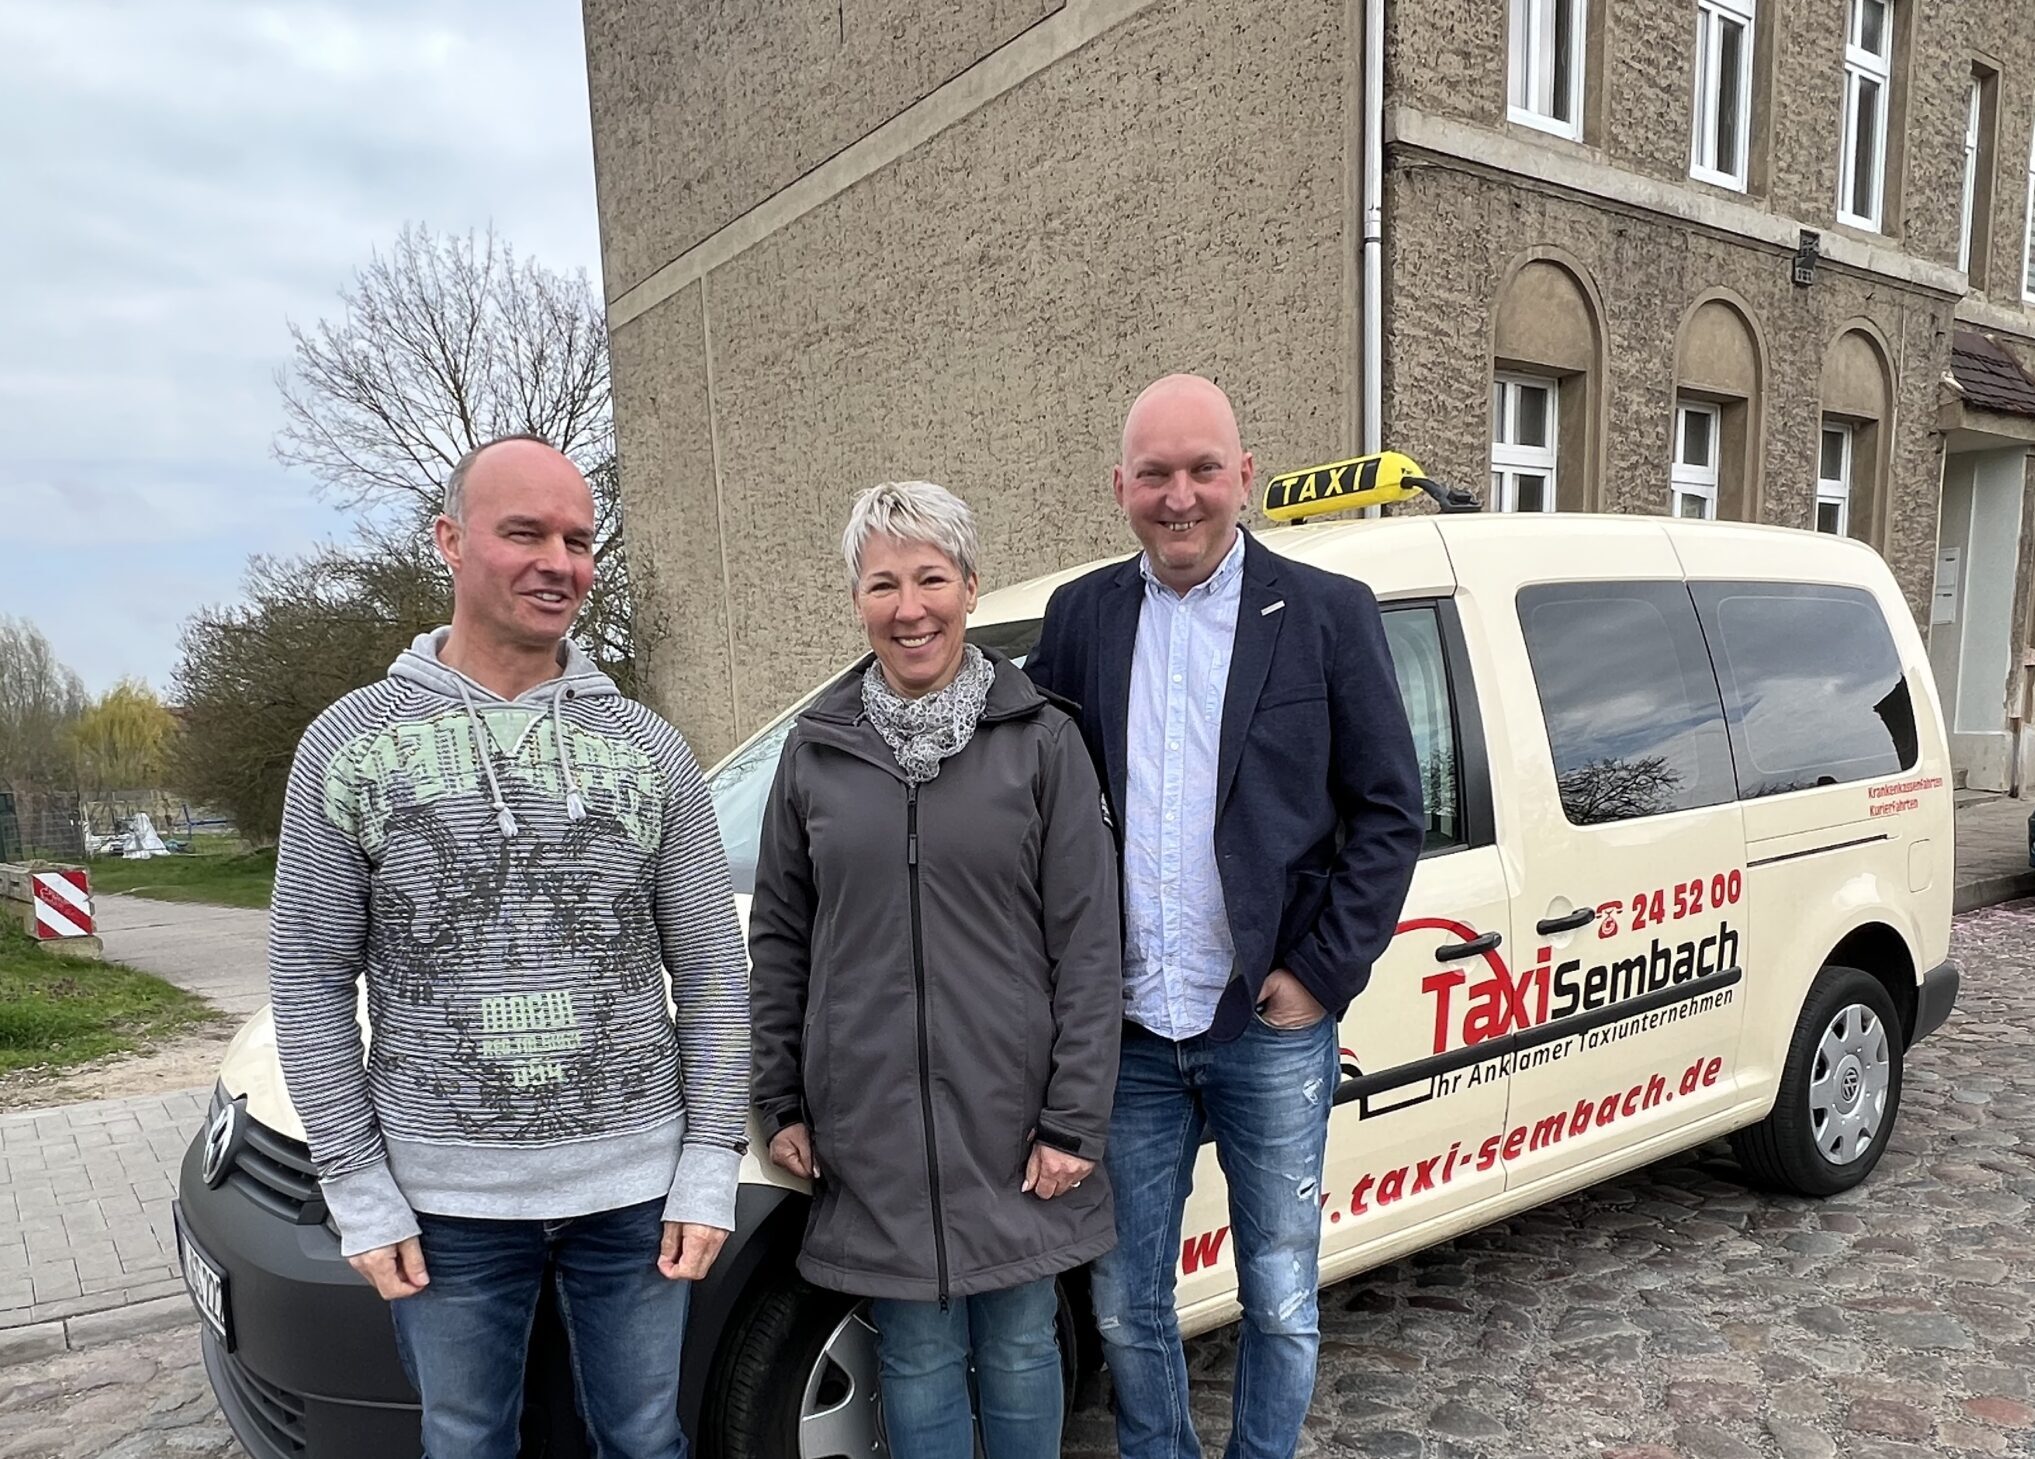 Inklusion mit Herz: Andreas Tunnat, Heike Mahler und Guido Sembach /v.l.n.r.) vorm Taxi in Anklam